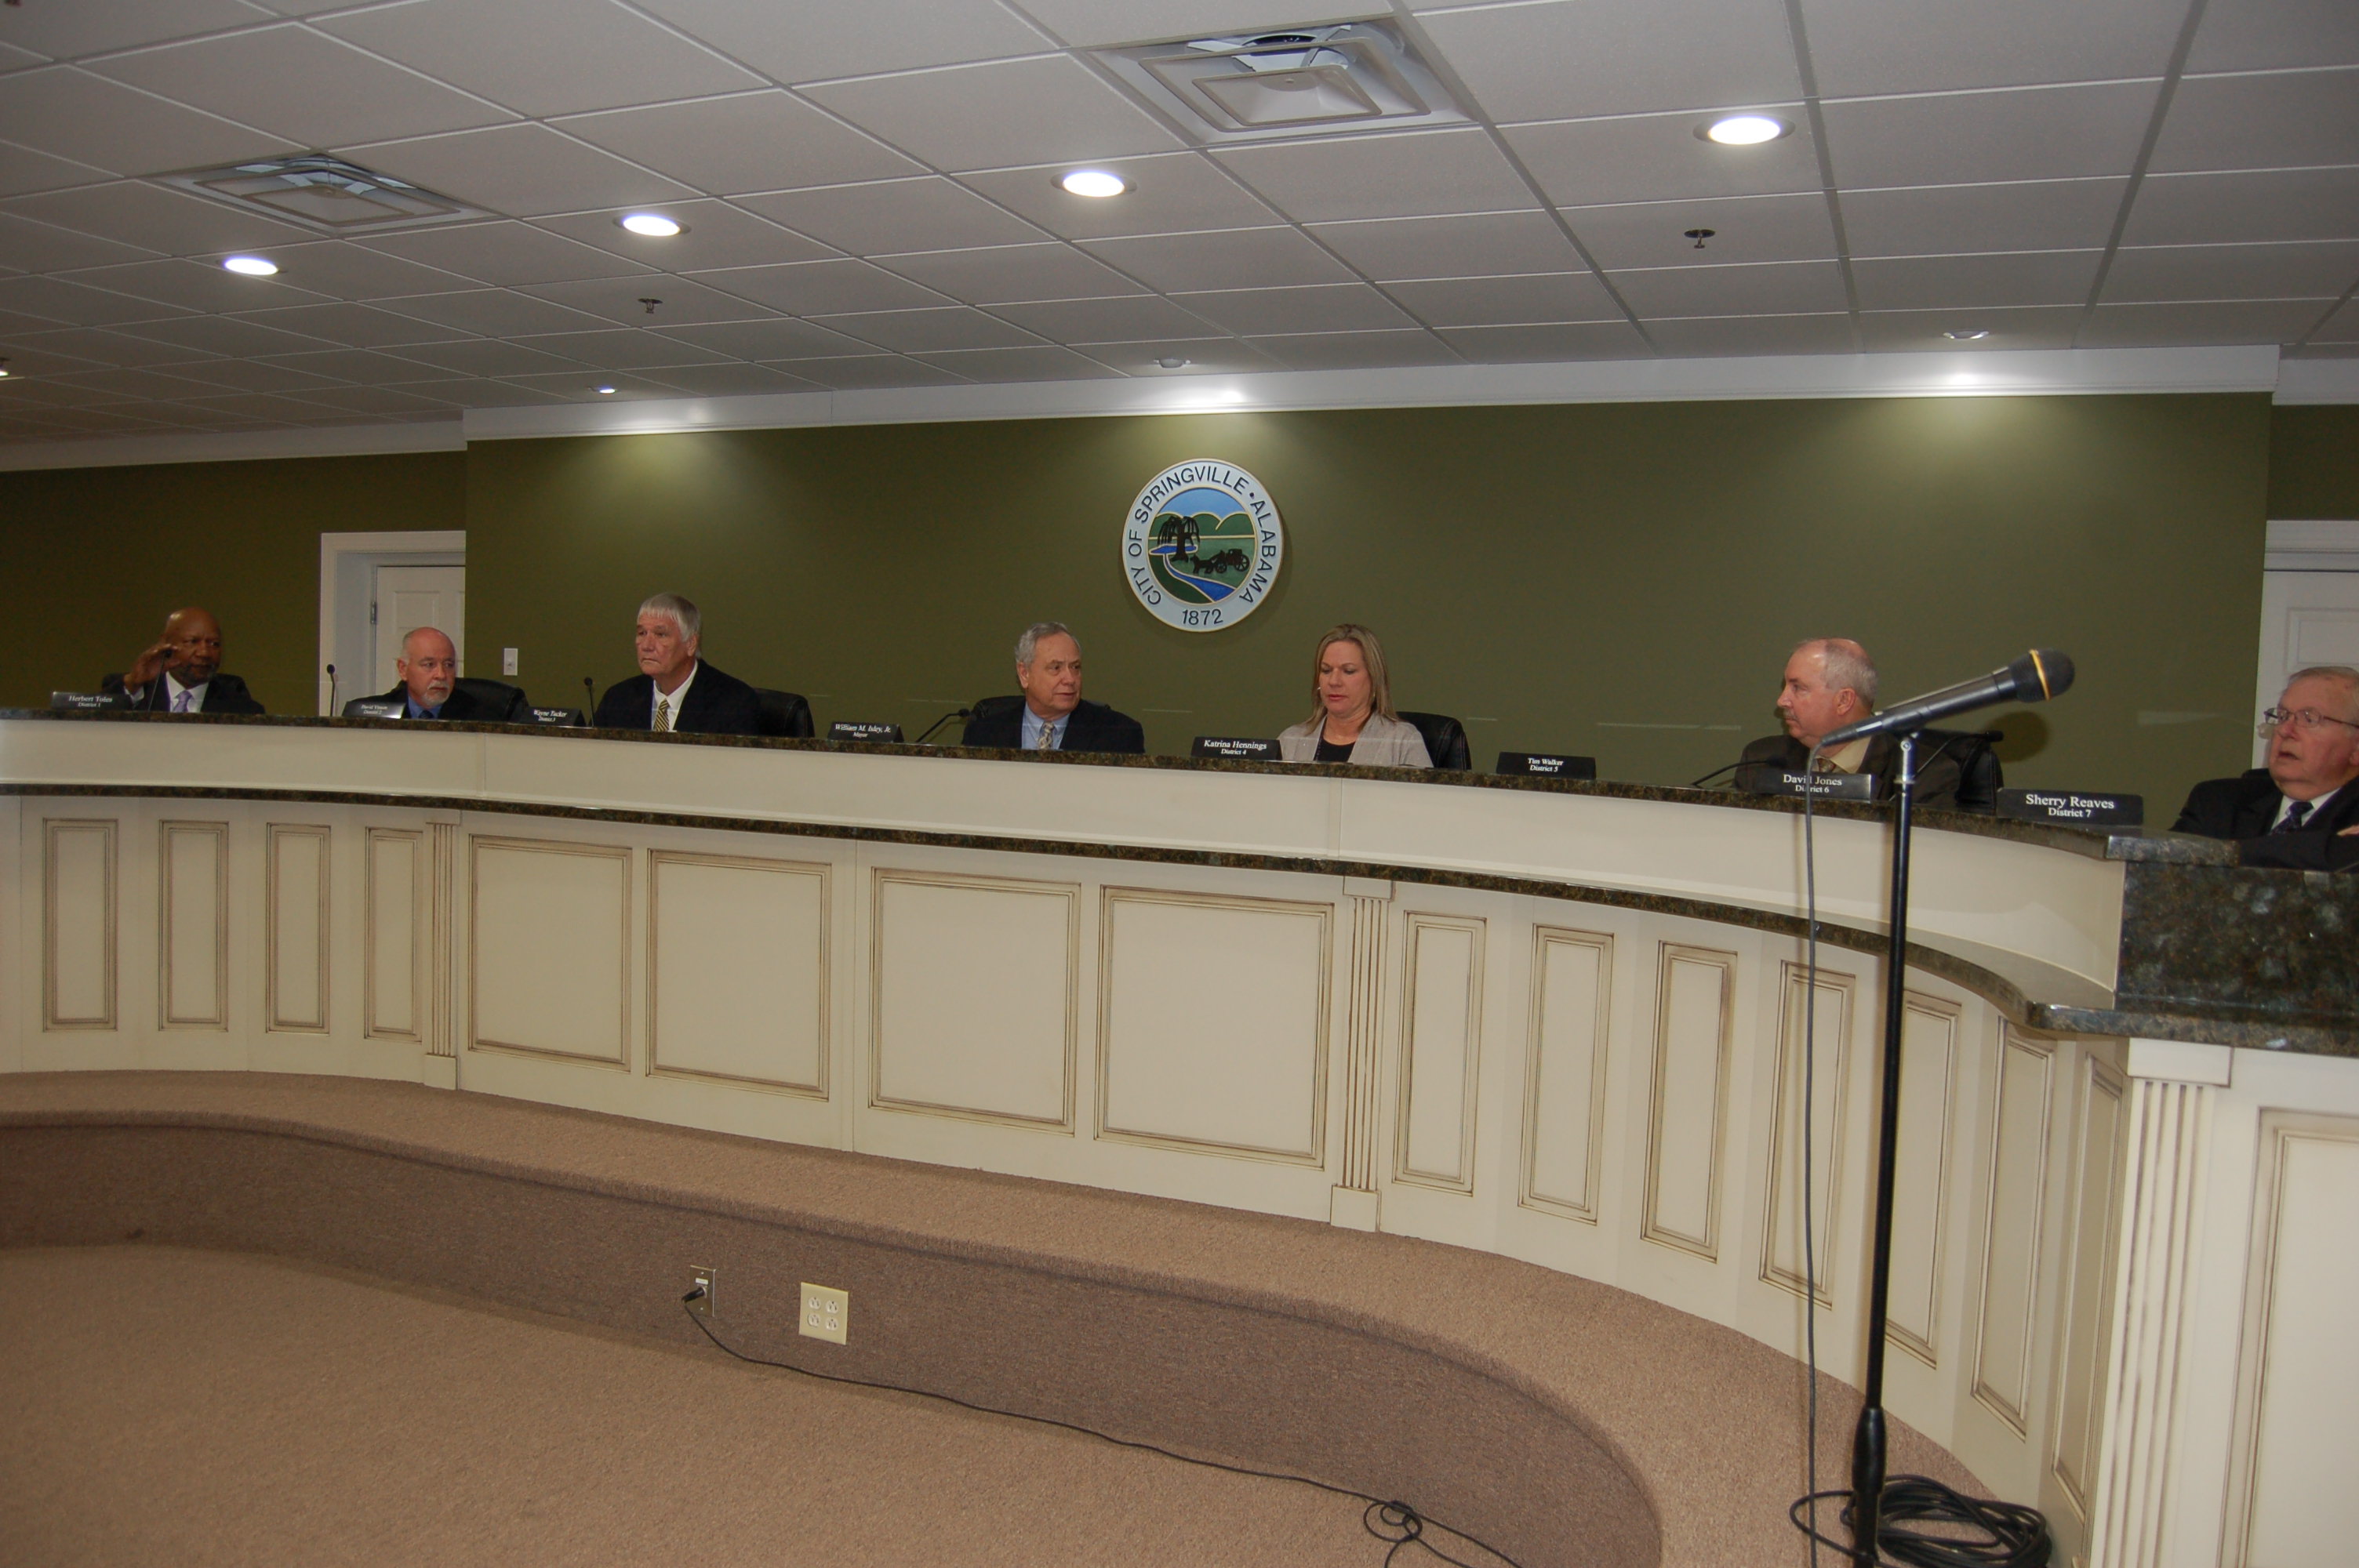 Springville Council's agenda for work session on Wednesday